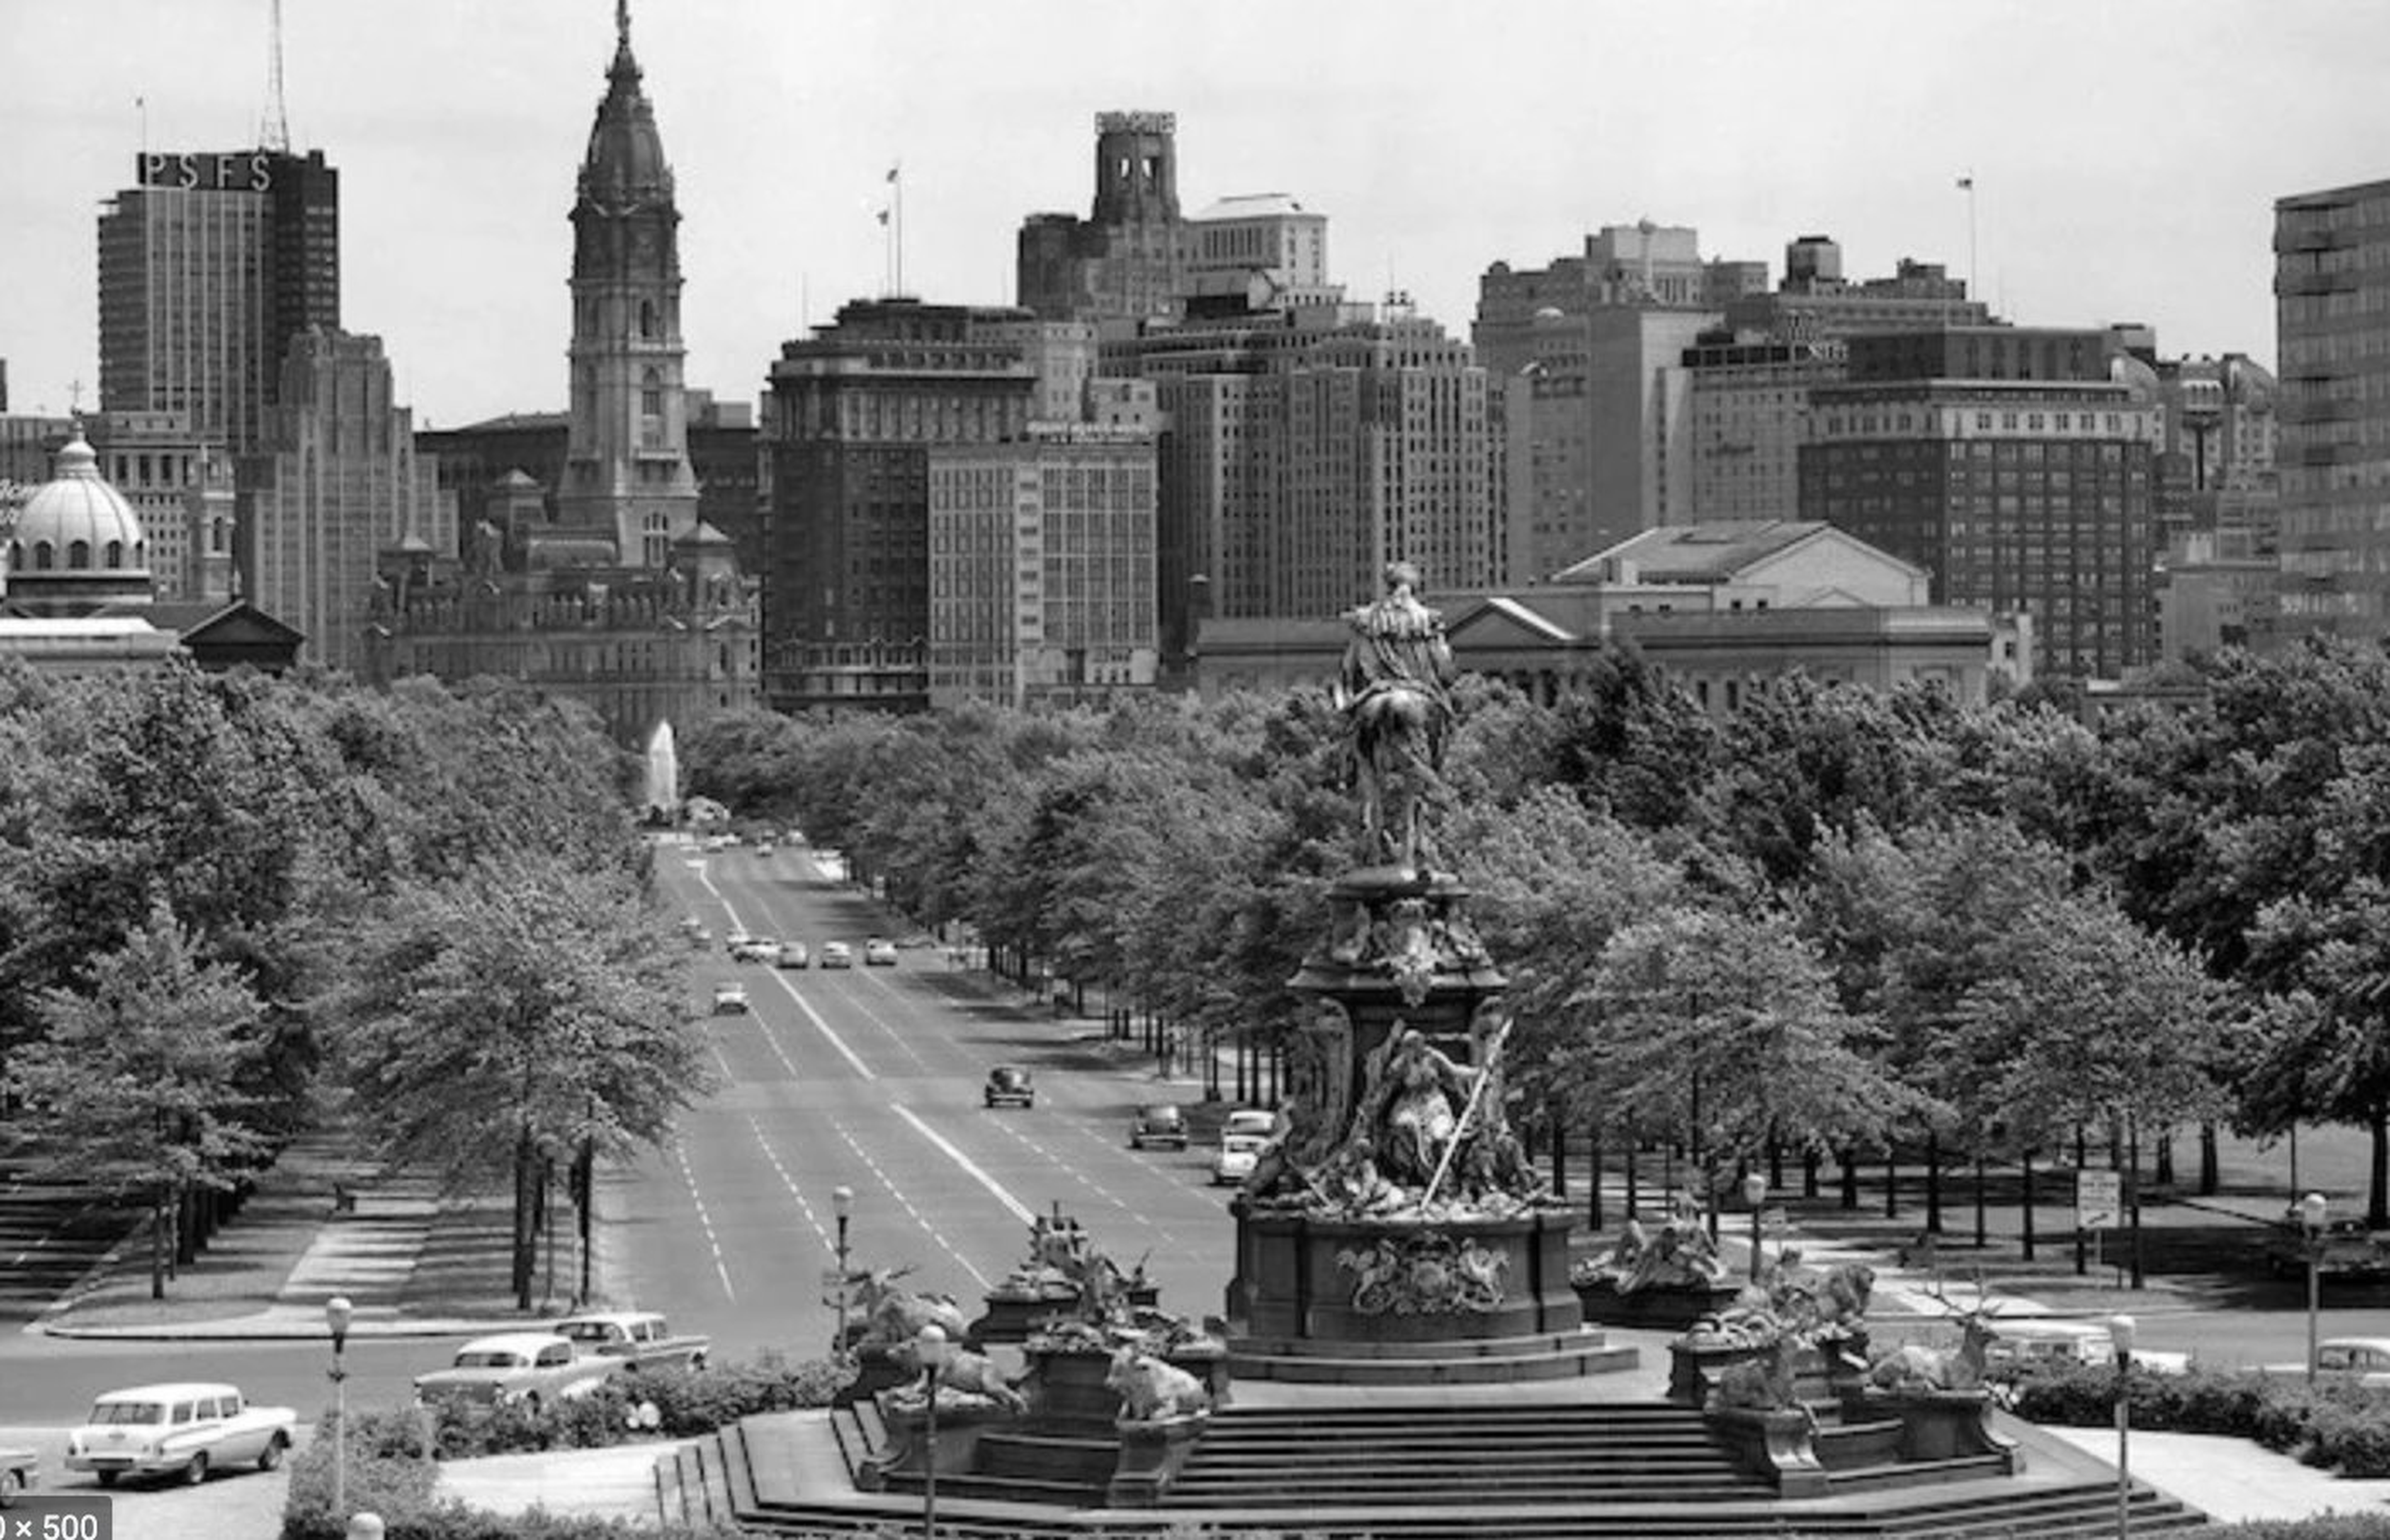 '1950s Benjamin Franklin Parkway Looking Southwest from Art Museum Past Eakins to Logan Circle to City Hall Philadelphia Pa USA' Photographic Print on Wrapped Canvas - Wayfair